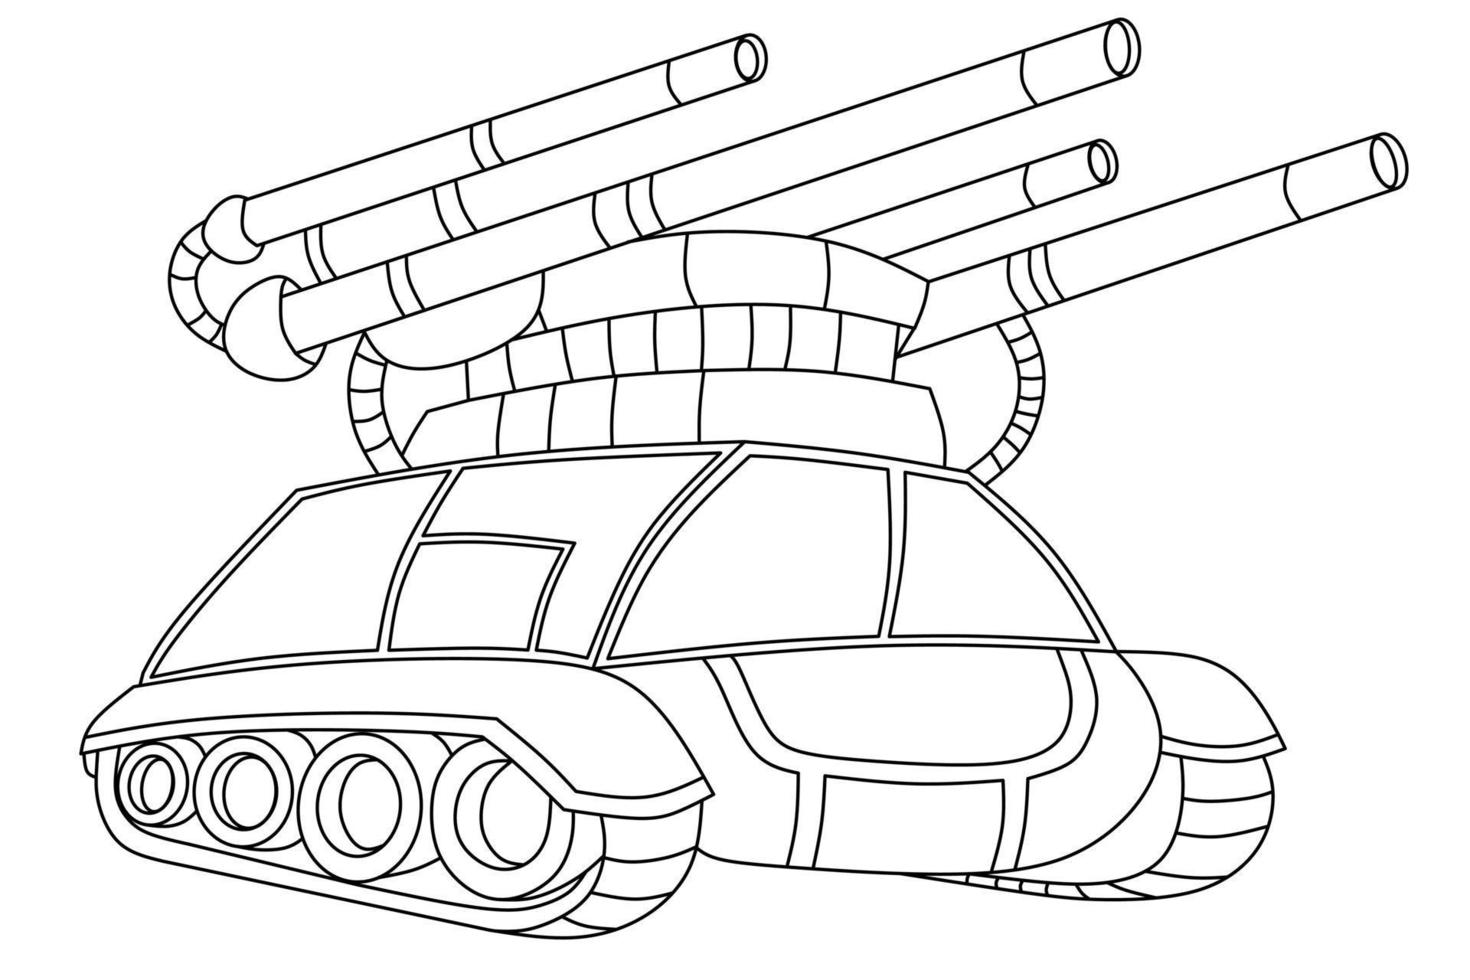 Tank coloring page vector